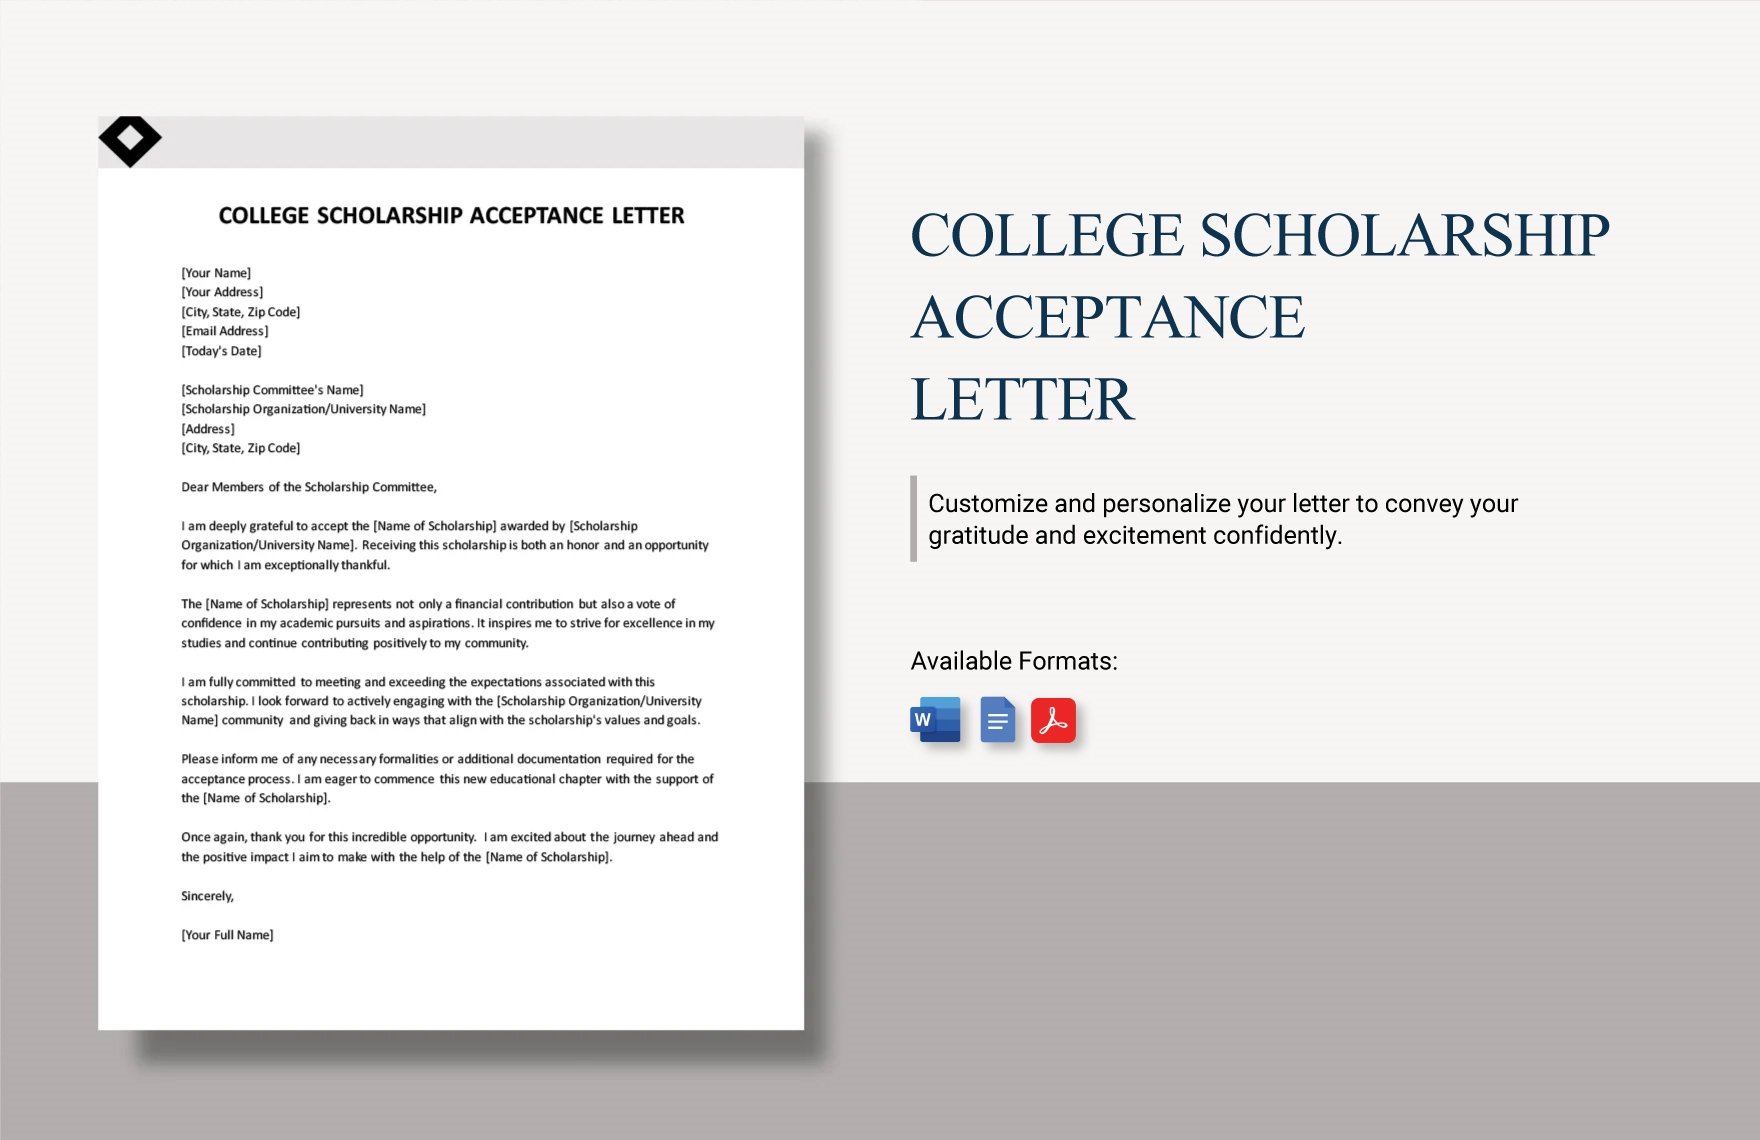 College Scholarship Acceptance Letter in Word, Google Docs, PDF